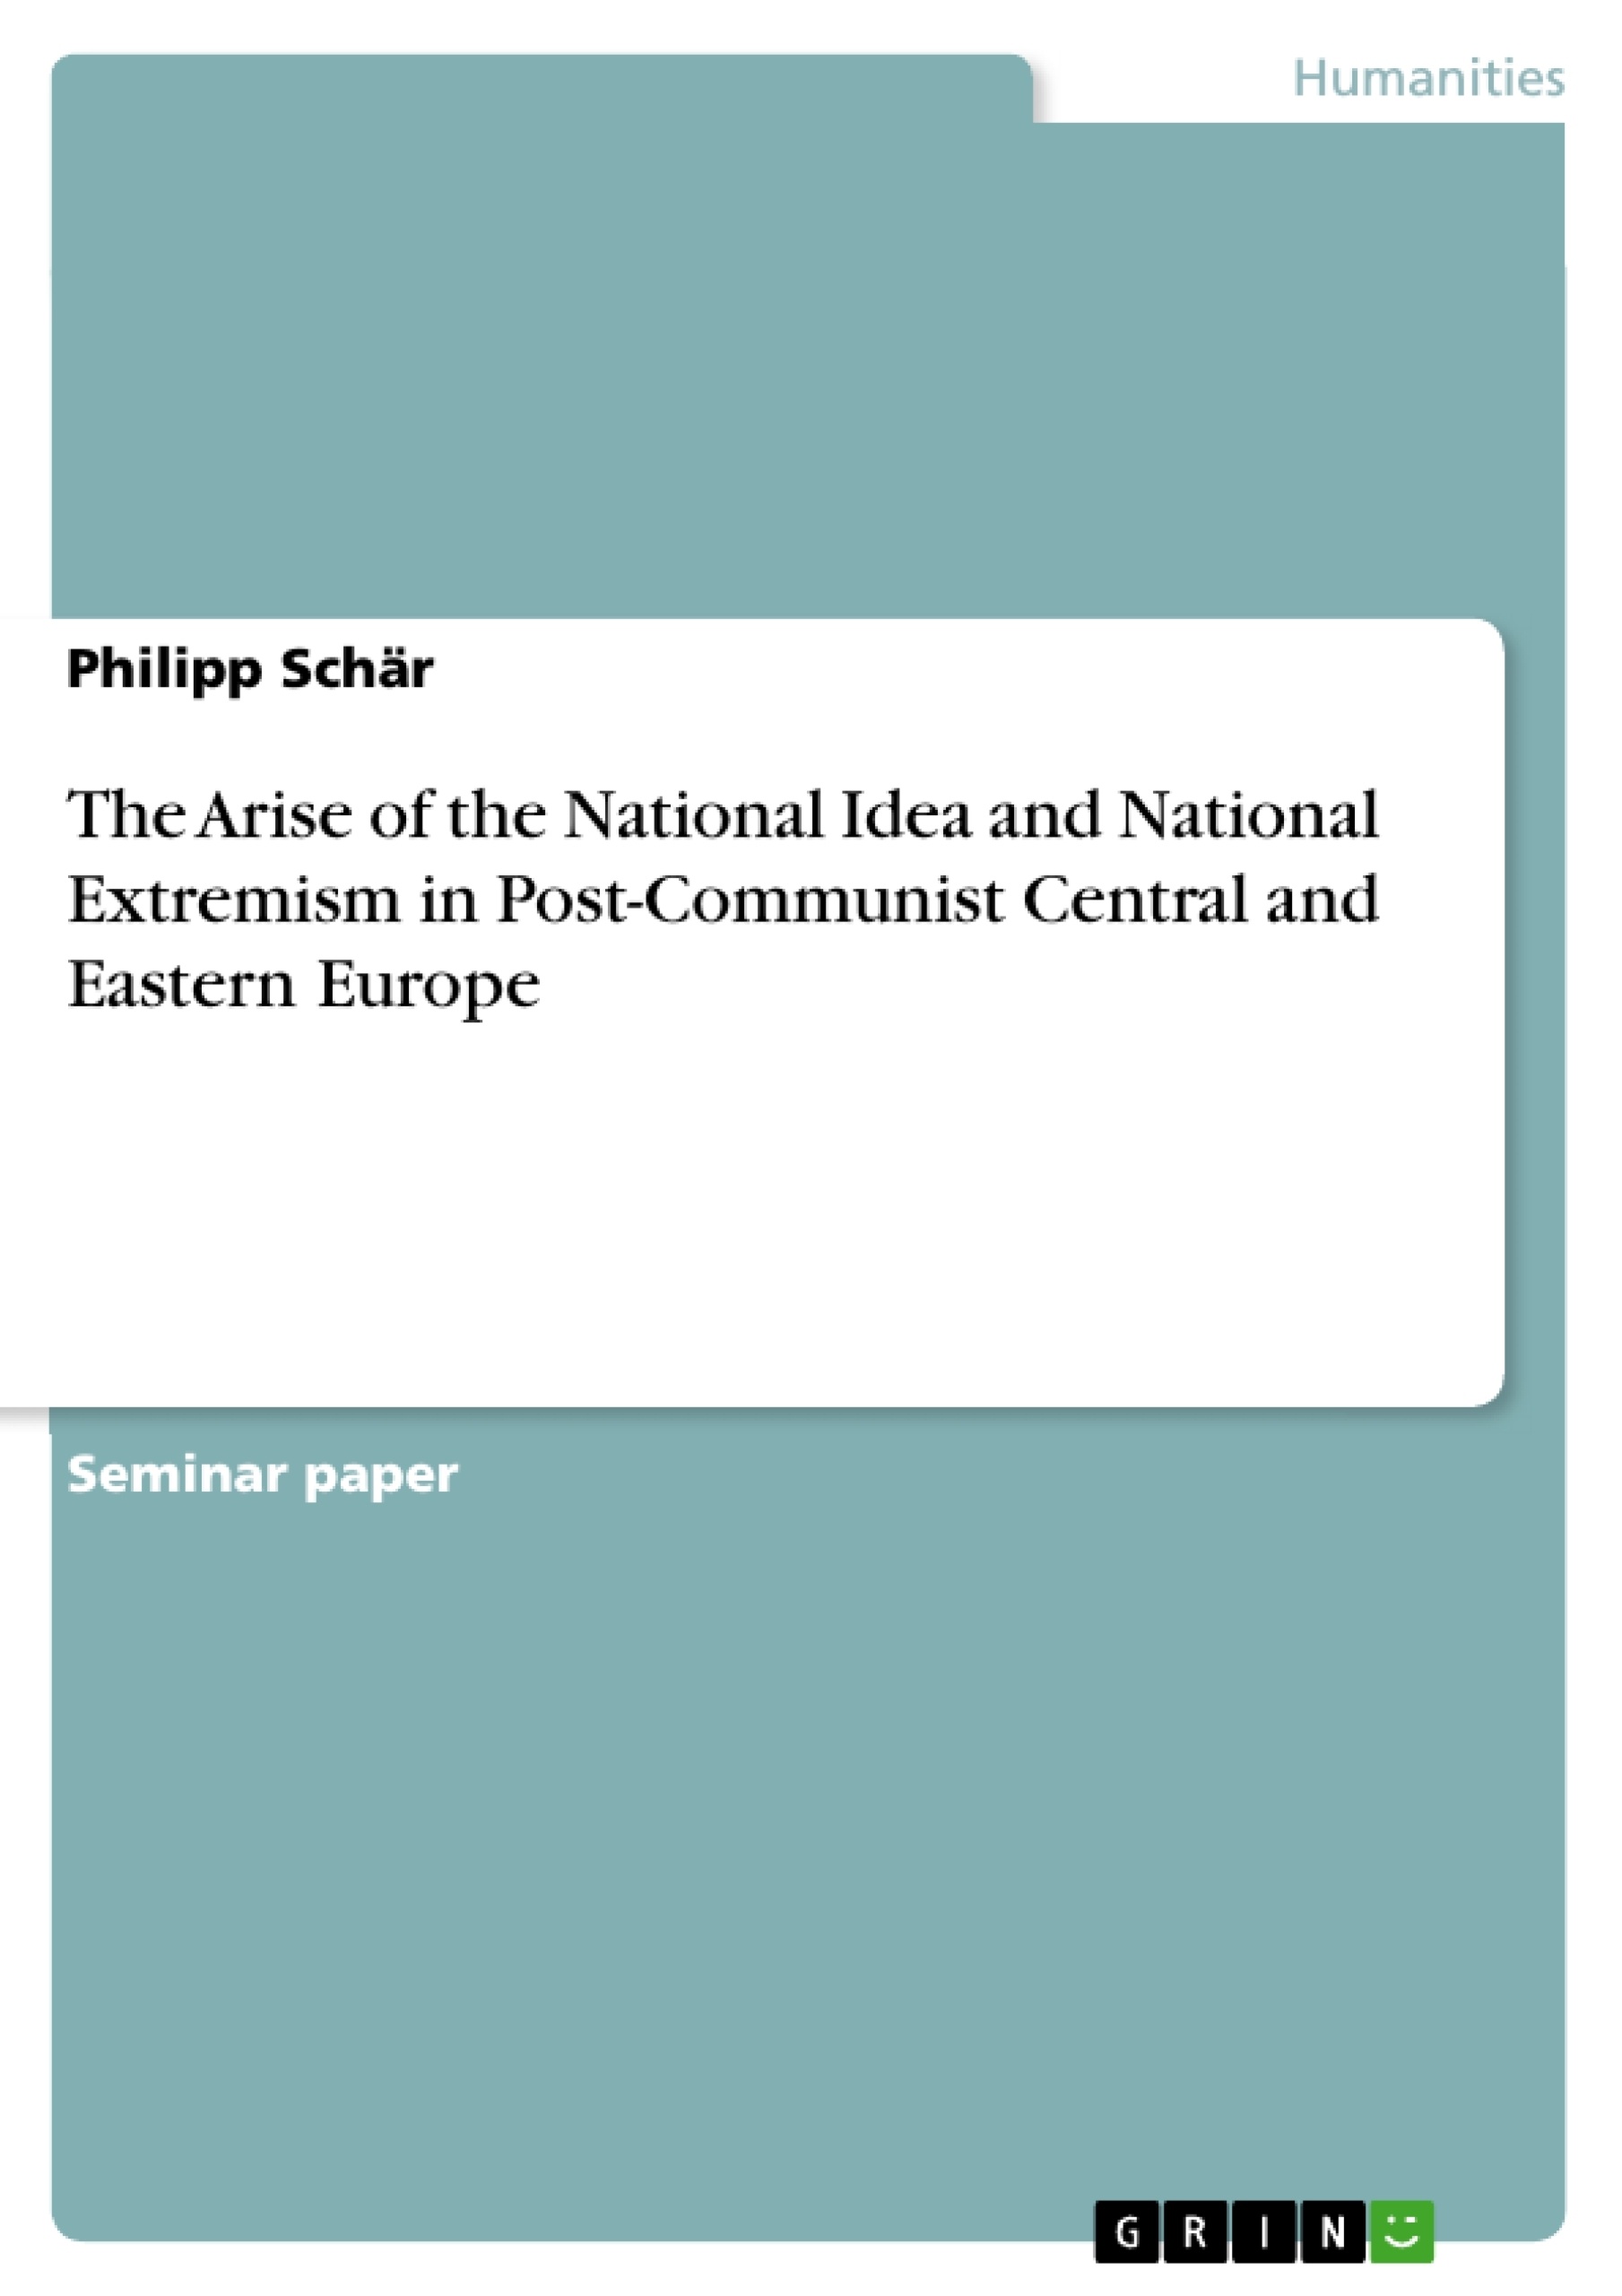 Title: The Arise of the National Idea and National Extremism in Post-Communist Central and Eastern Europe